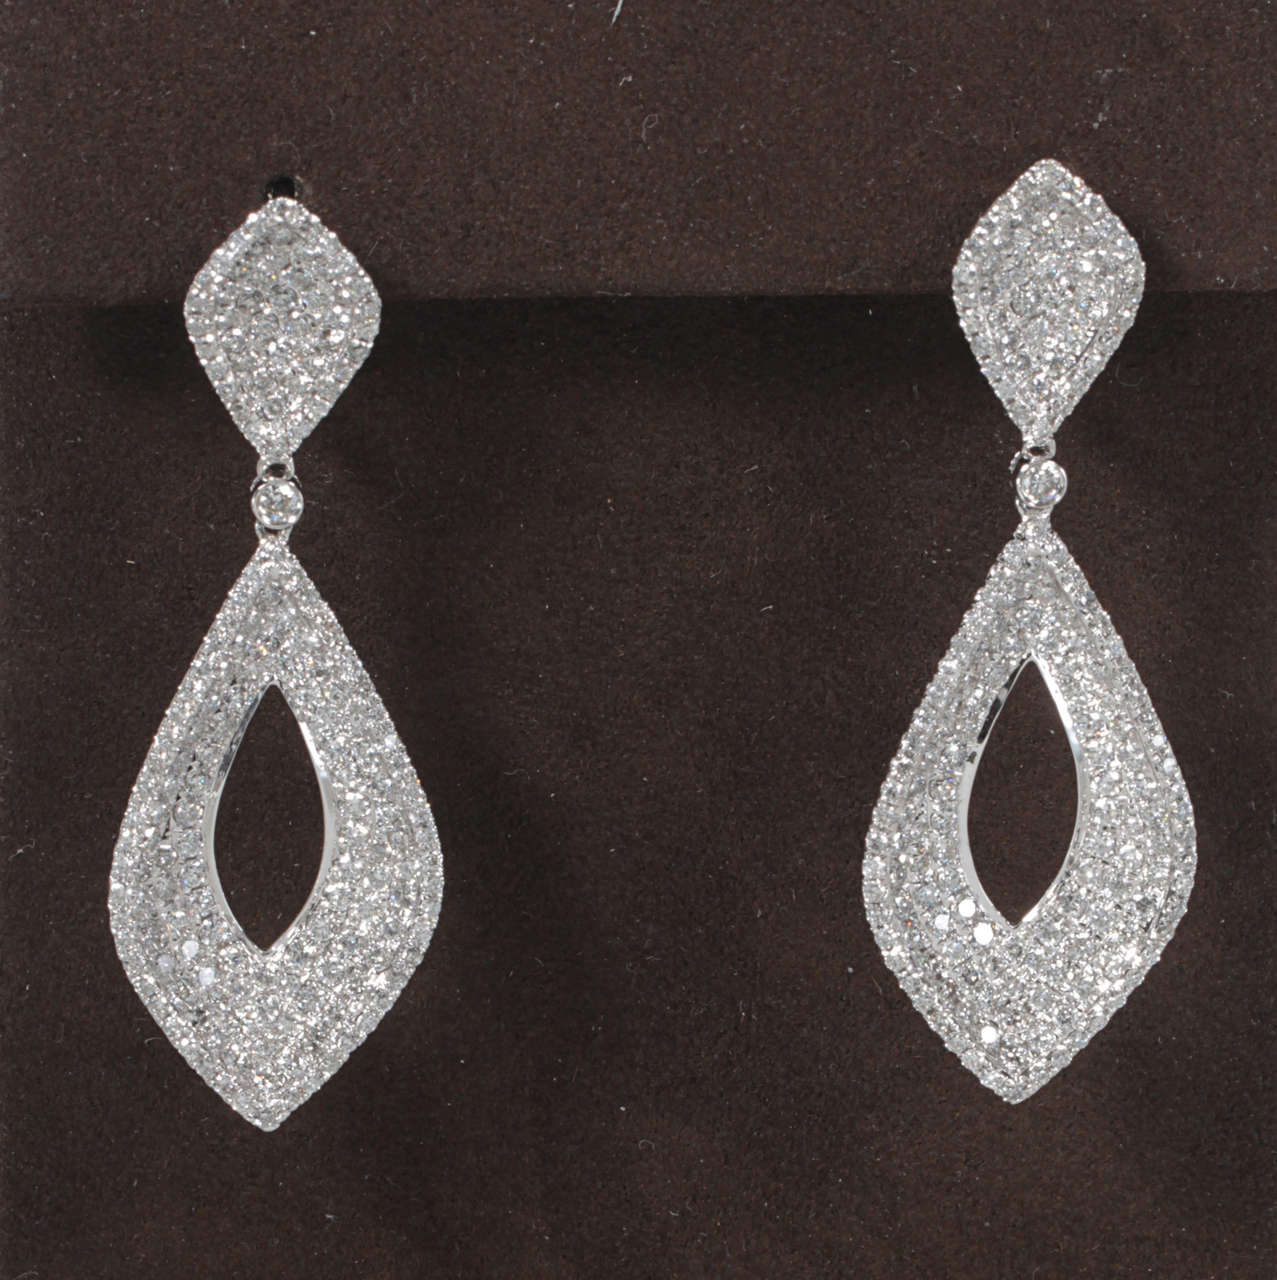 A beautiful earring to add to any collection!

4.45 carats of brilliant white diamonds set in 18k white gold

Approximately 1.70 inches long. 